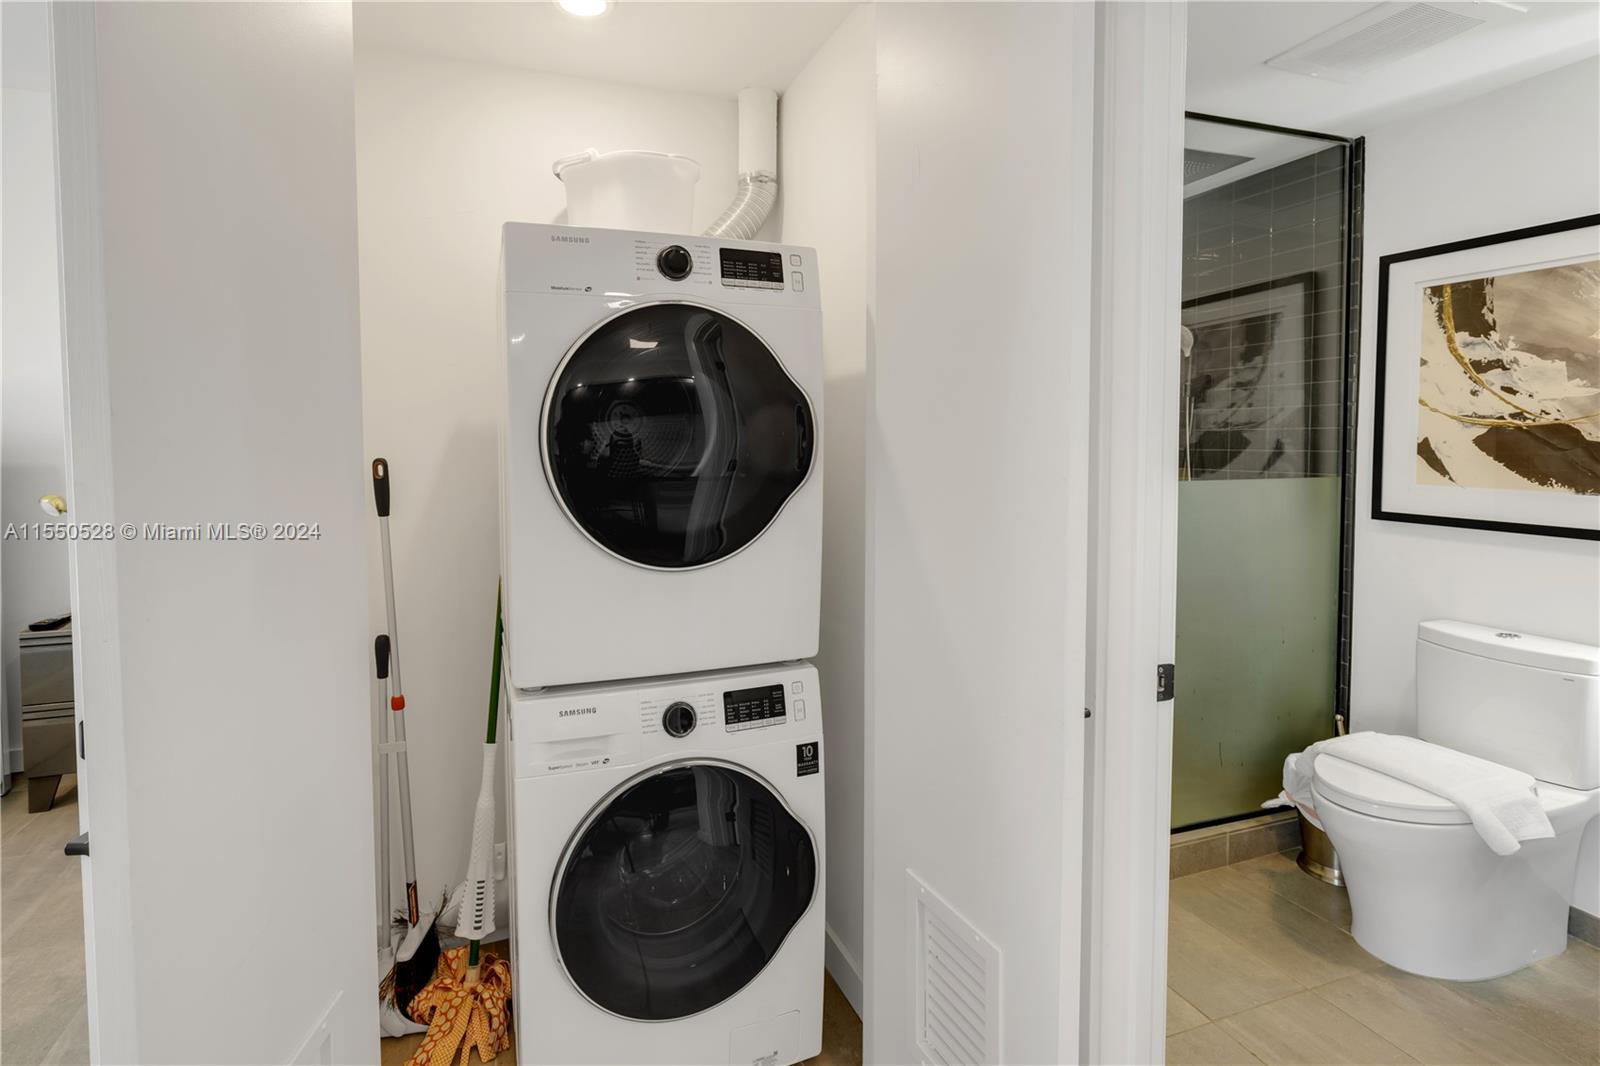 a view of a hallway with washer and dryer